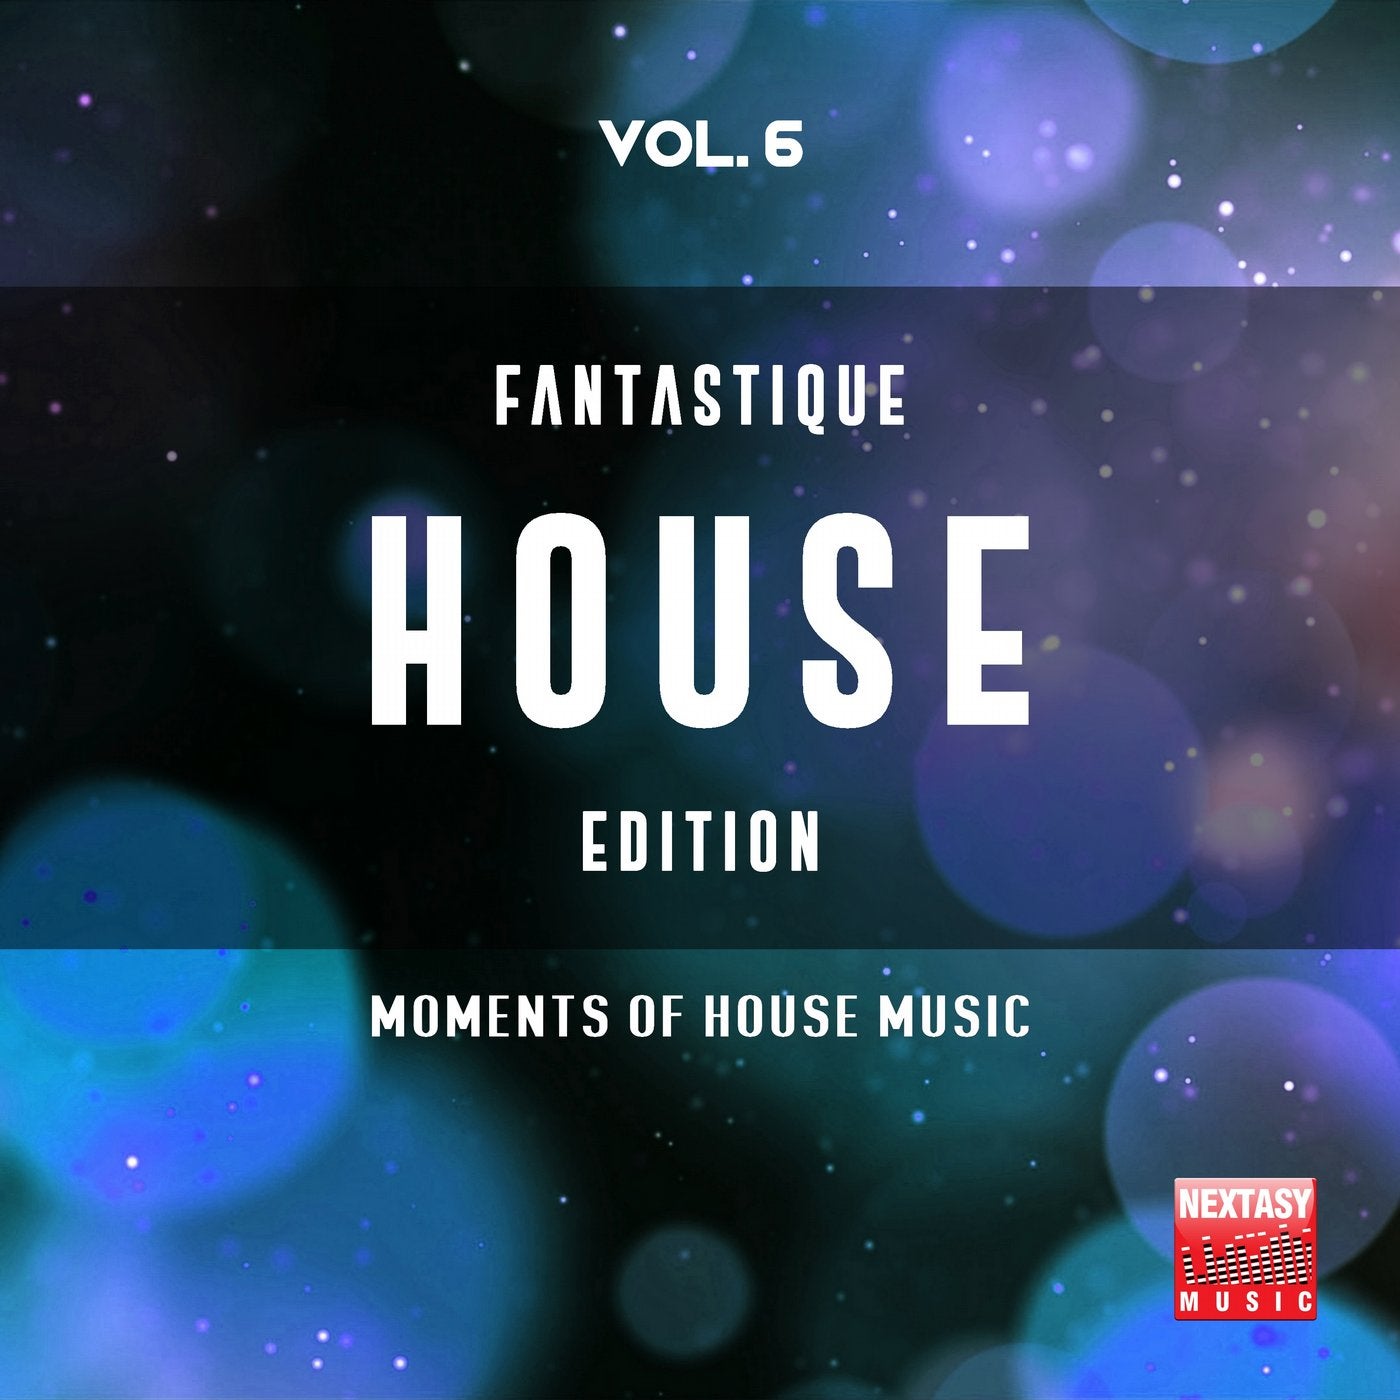 Fantastique House Edition, Vol. 6 (Moments Of House Music)